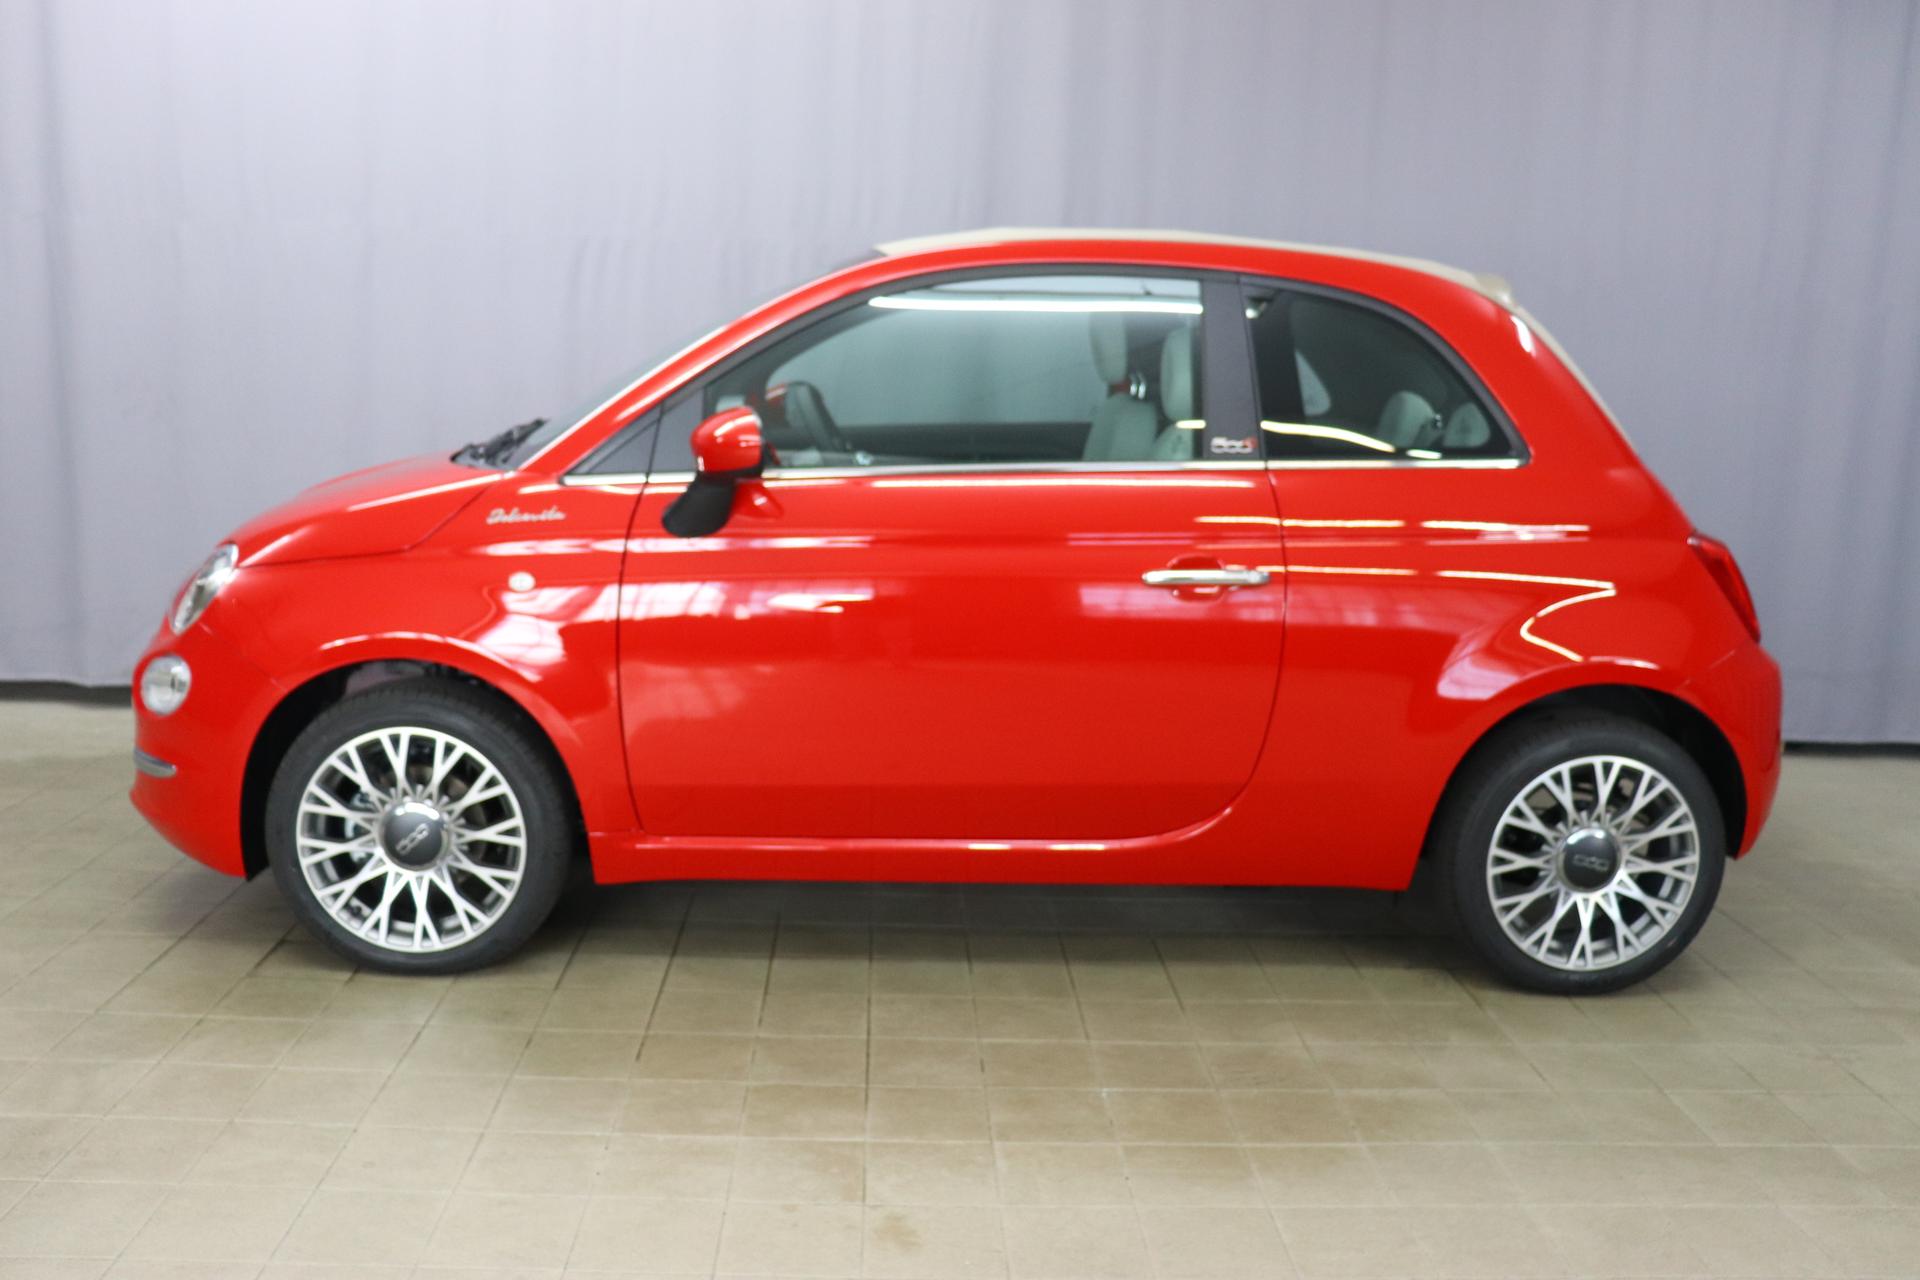 Fiat 500C Dolcevita 1.0 GSE Hybrid 51kW 69PS111 Passione Rot	319 - Stoff 